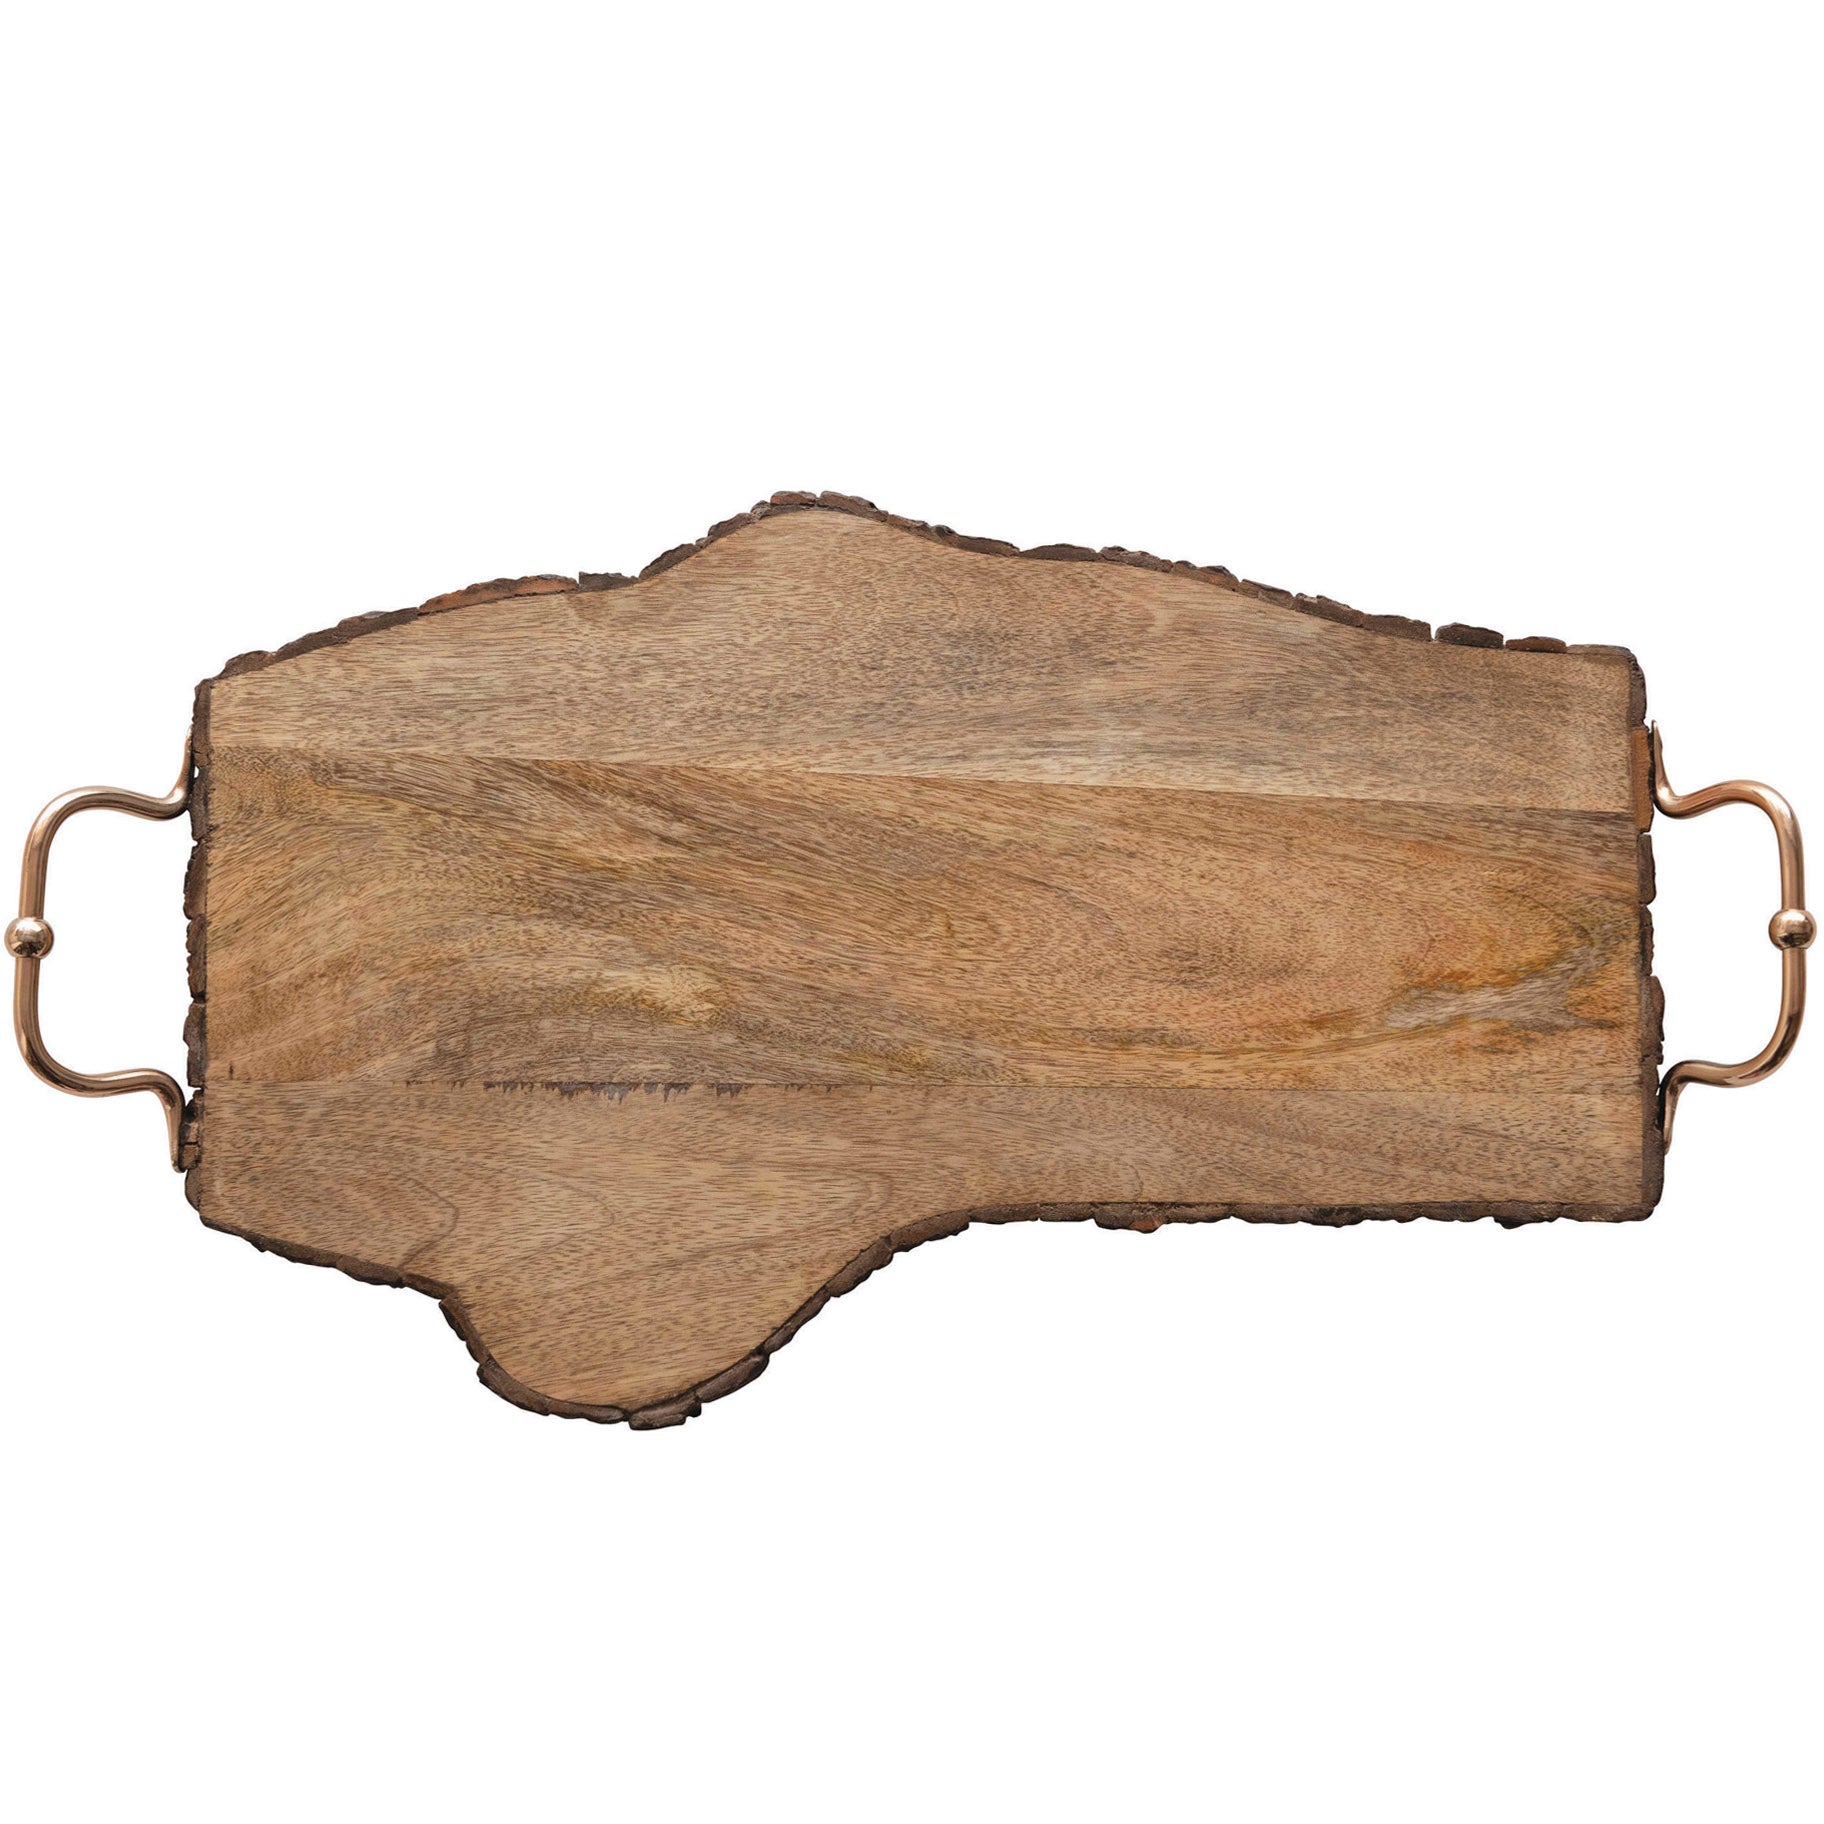 Rustic Wood Bark Edge Cheese and Charcuterie Serving Board